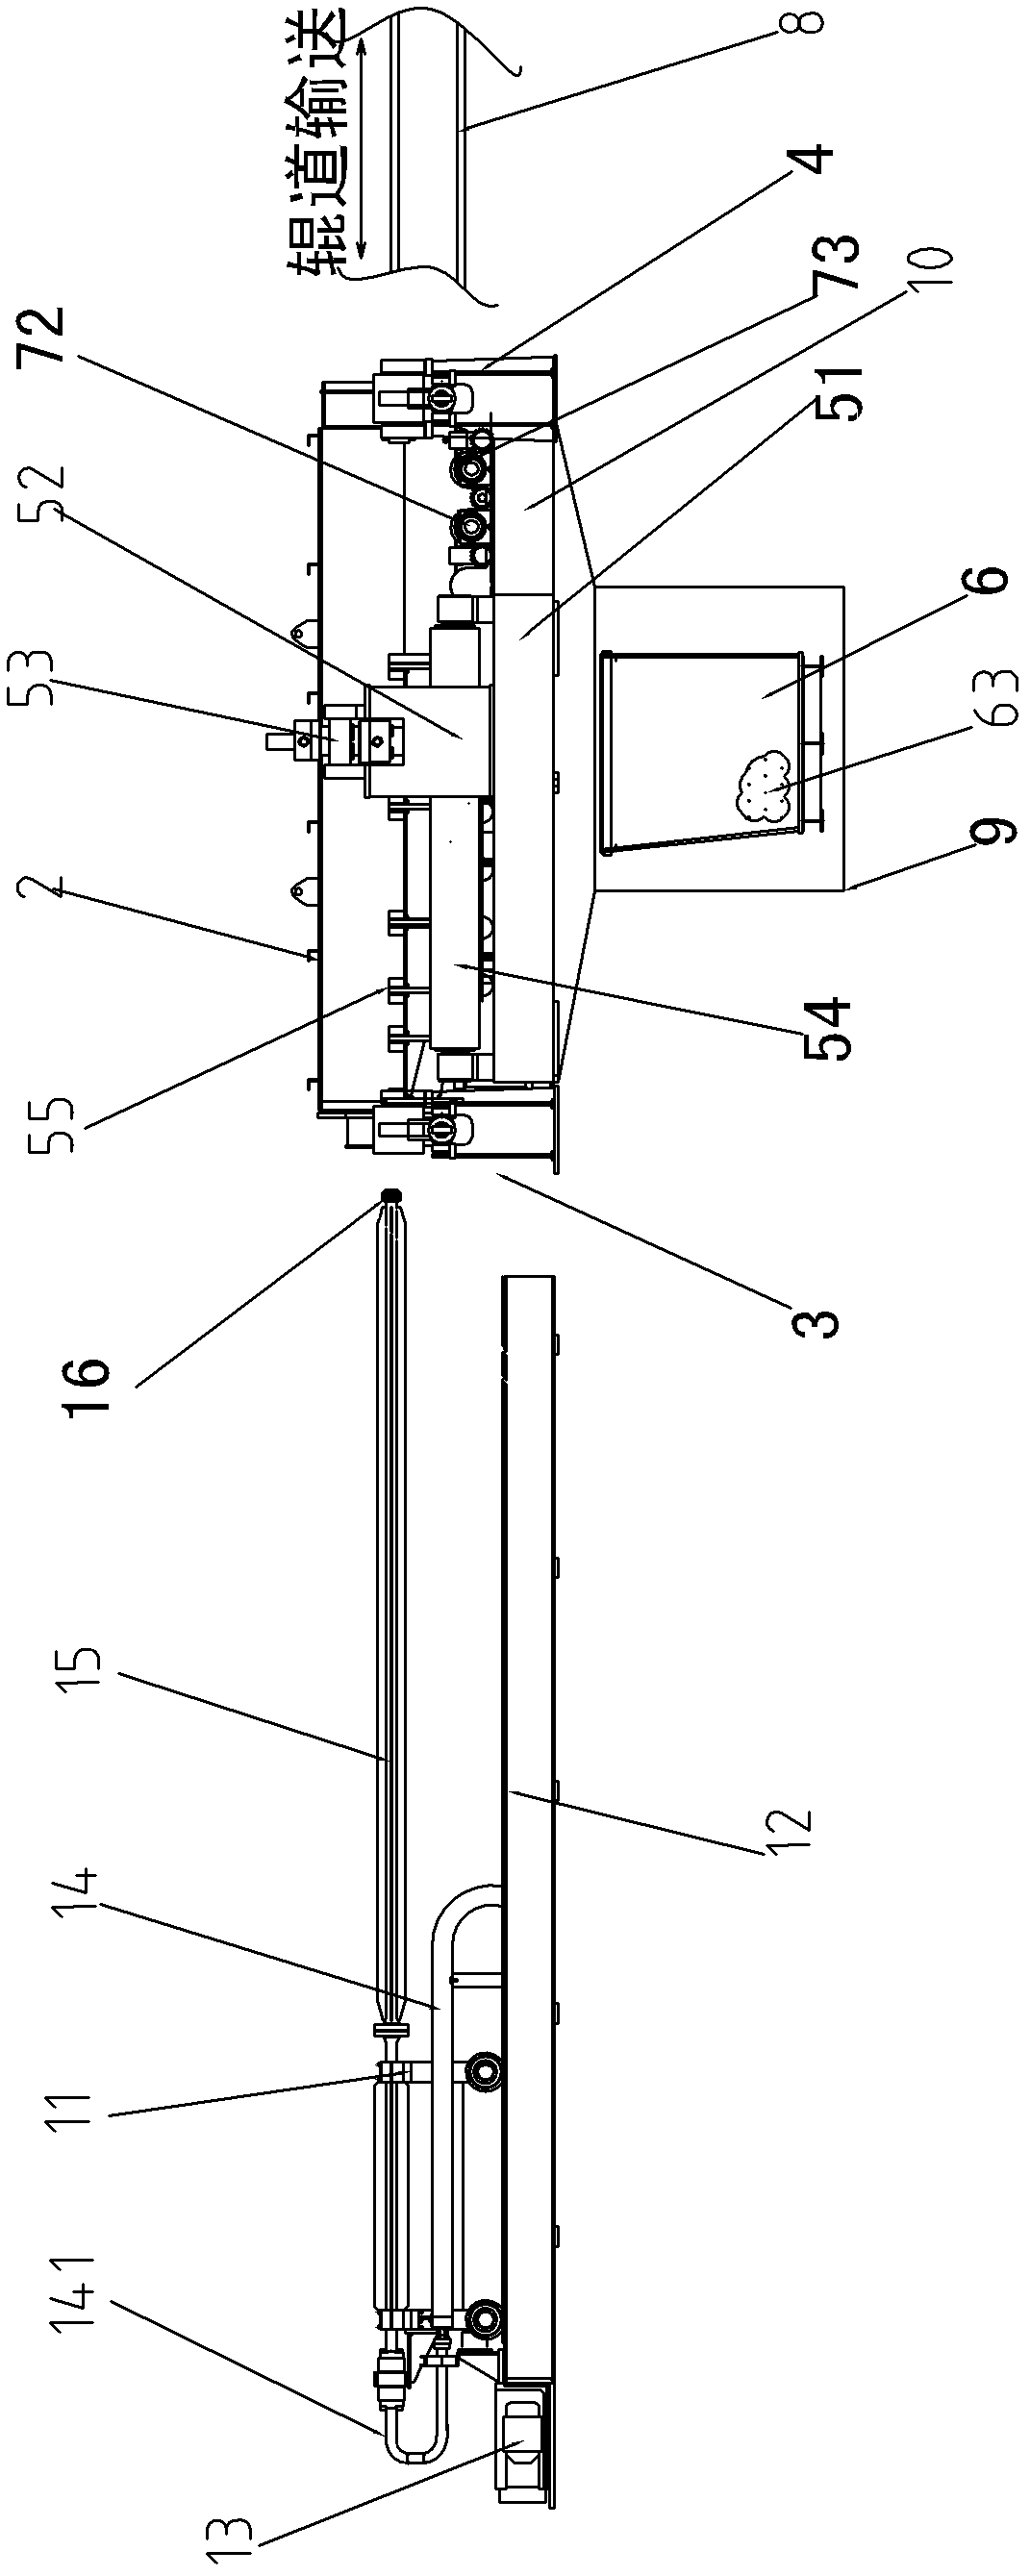 Device for descaling by high-pressure water